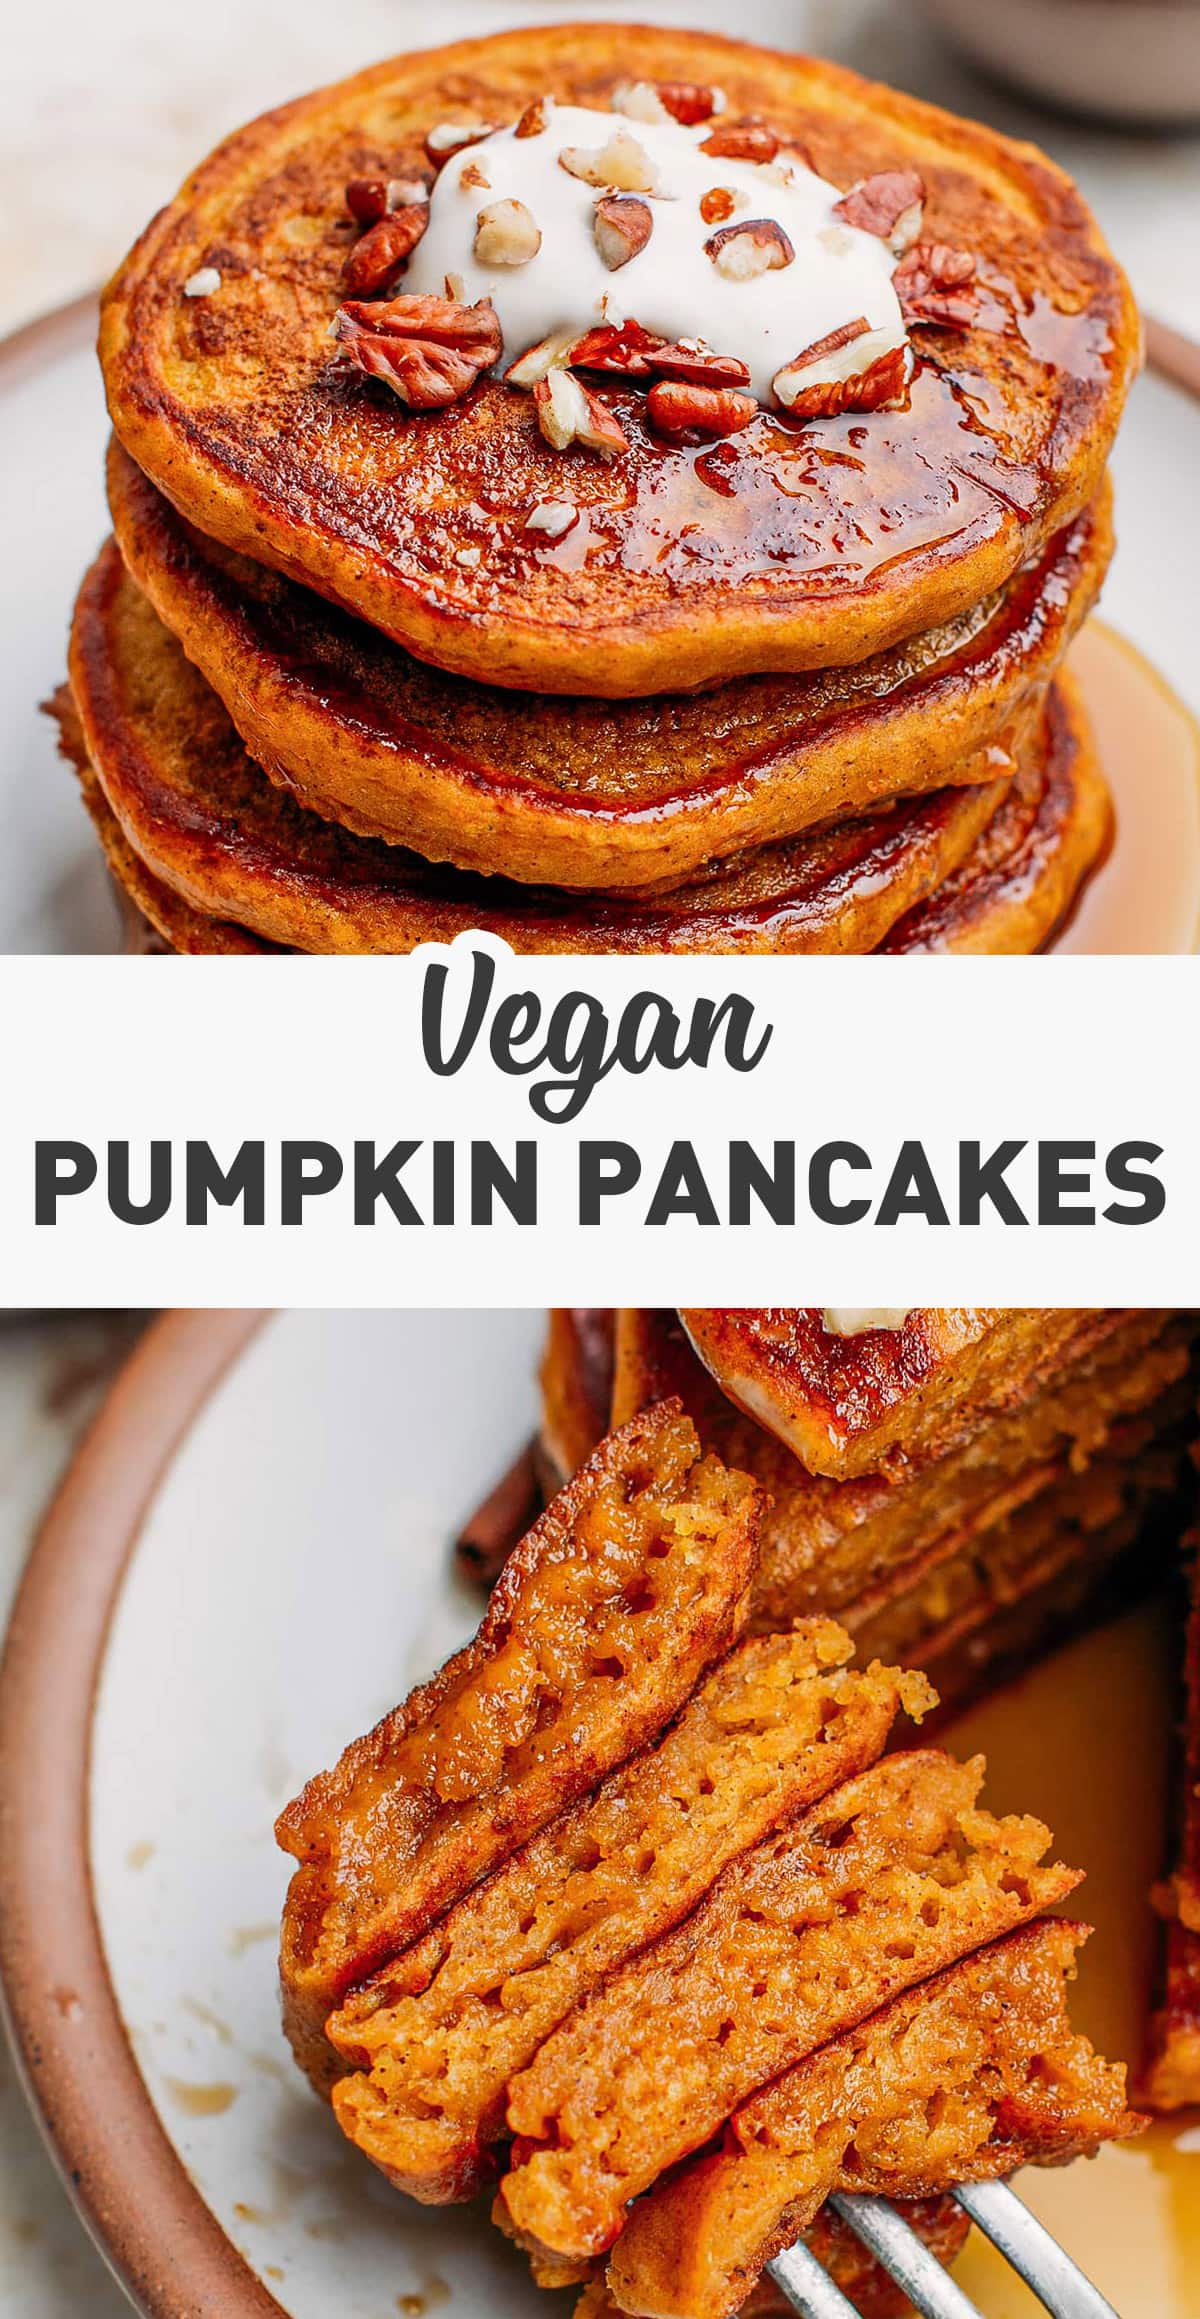 These vegan pumpkin pancakes are incredibly fluffy, moist, and pillowy! Enjoy drizzled with maple syrup and crushed pecans for a warming and hearty Fall breakfast. Only 8 ingredients and 15 minutes are required! #pumpkin #pancakes